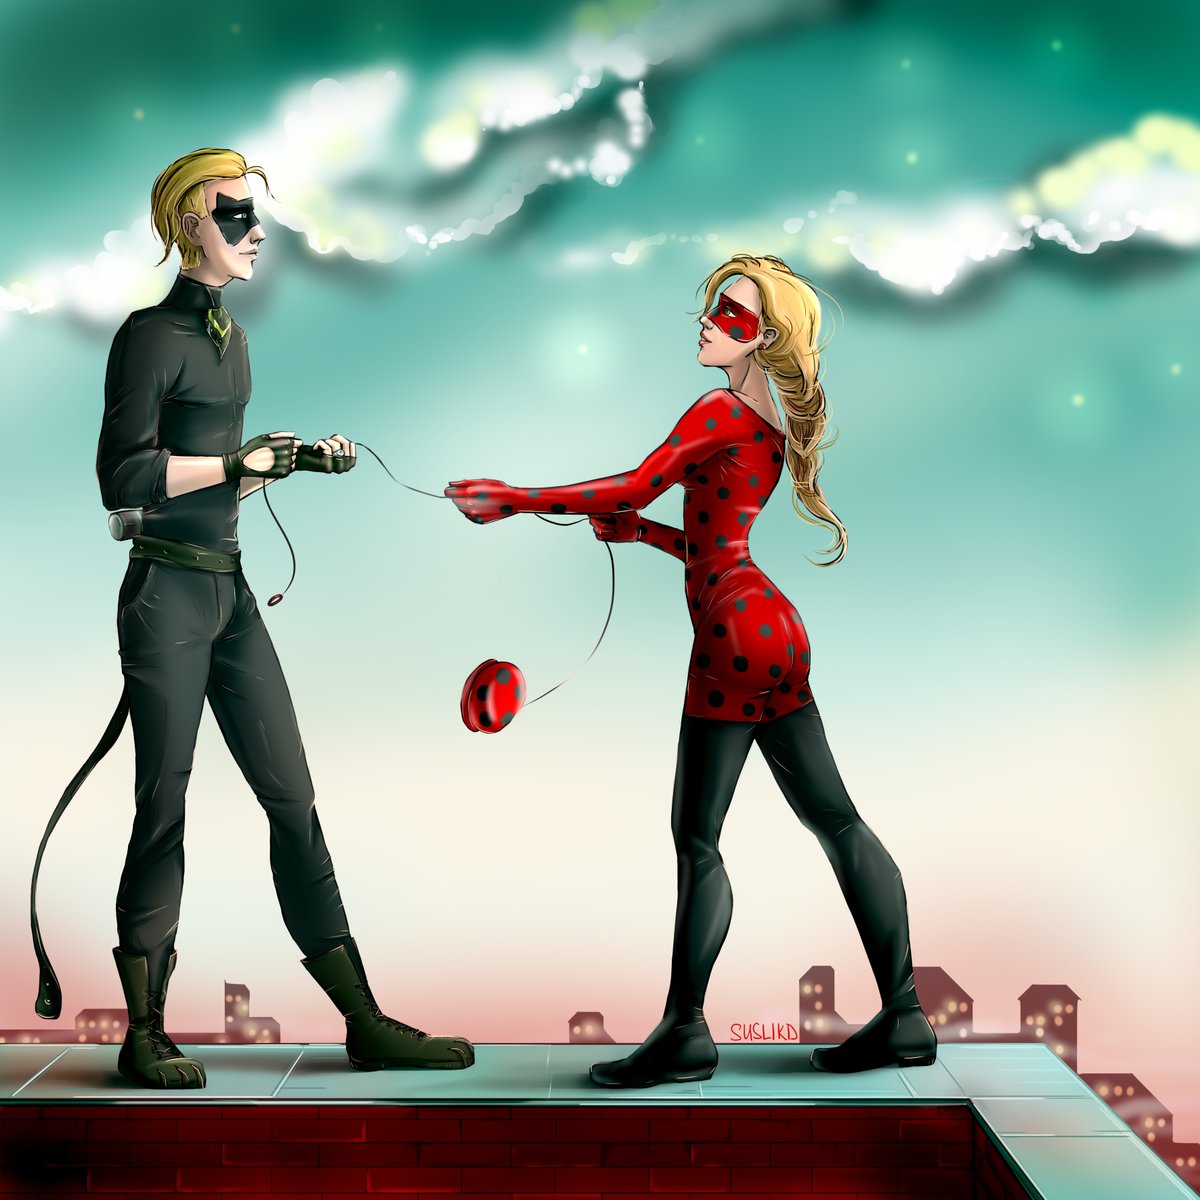 Suslikd I Was Really Inspired By One Fic So Here Is A Drawing Of Gabriel Agreste And Emilie Agreste As Chat Noir And Ladybug What A Cute Couple